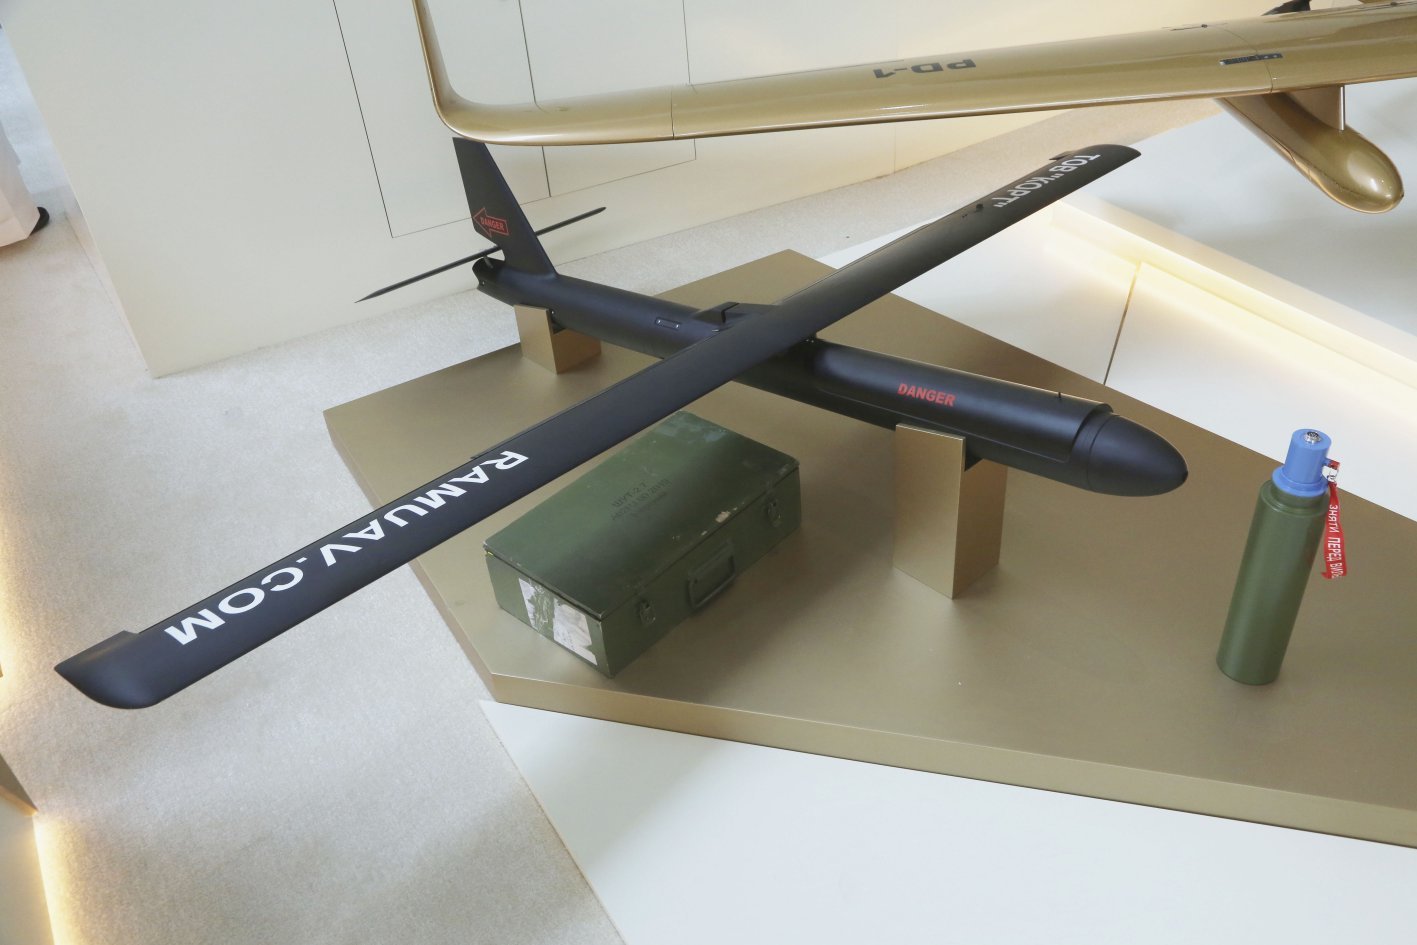 The CDET-developed RAM loitering munition with a modular (interchangeable) warhead (right). (N Novichkov)